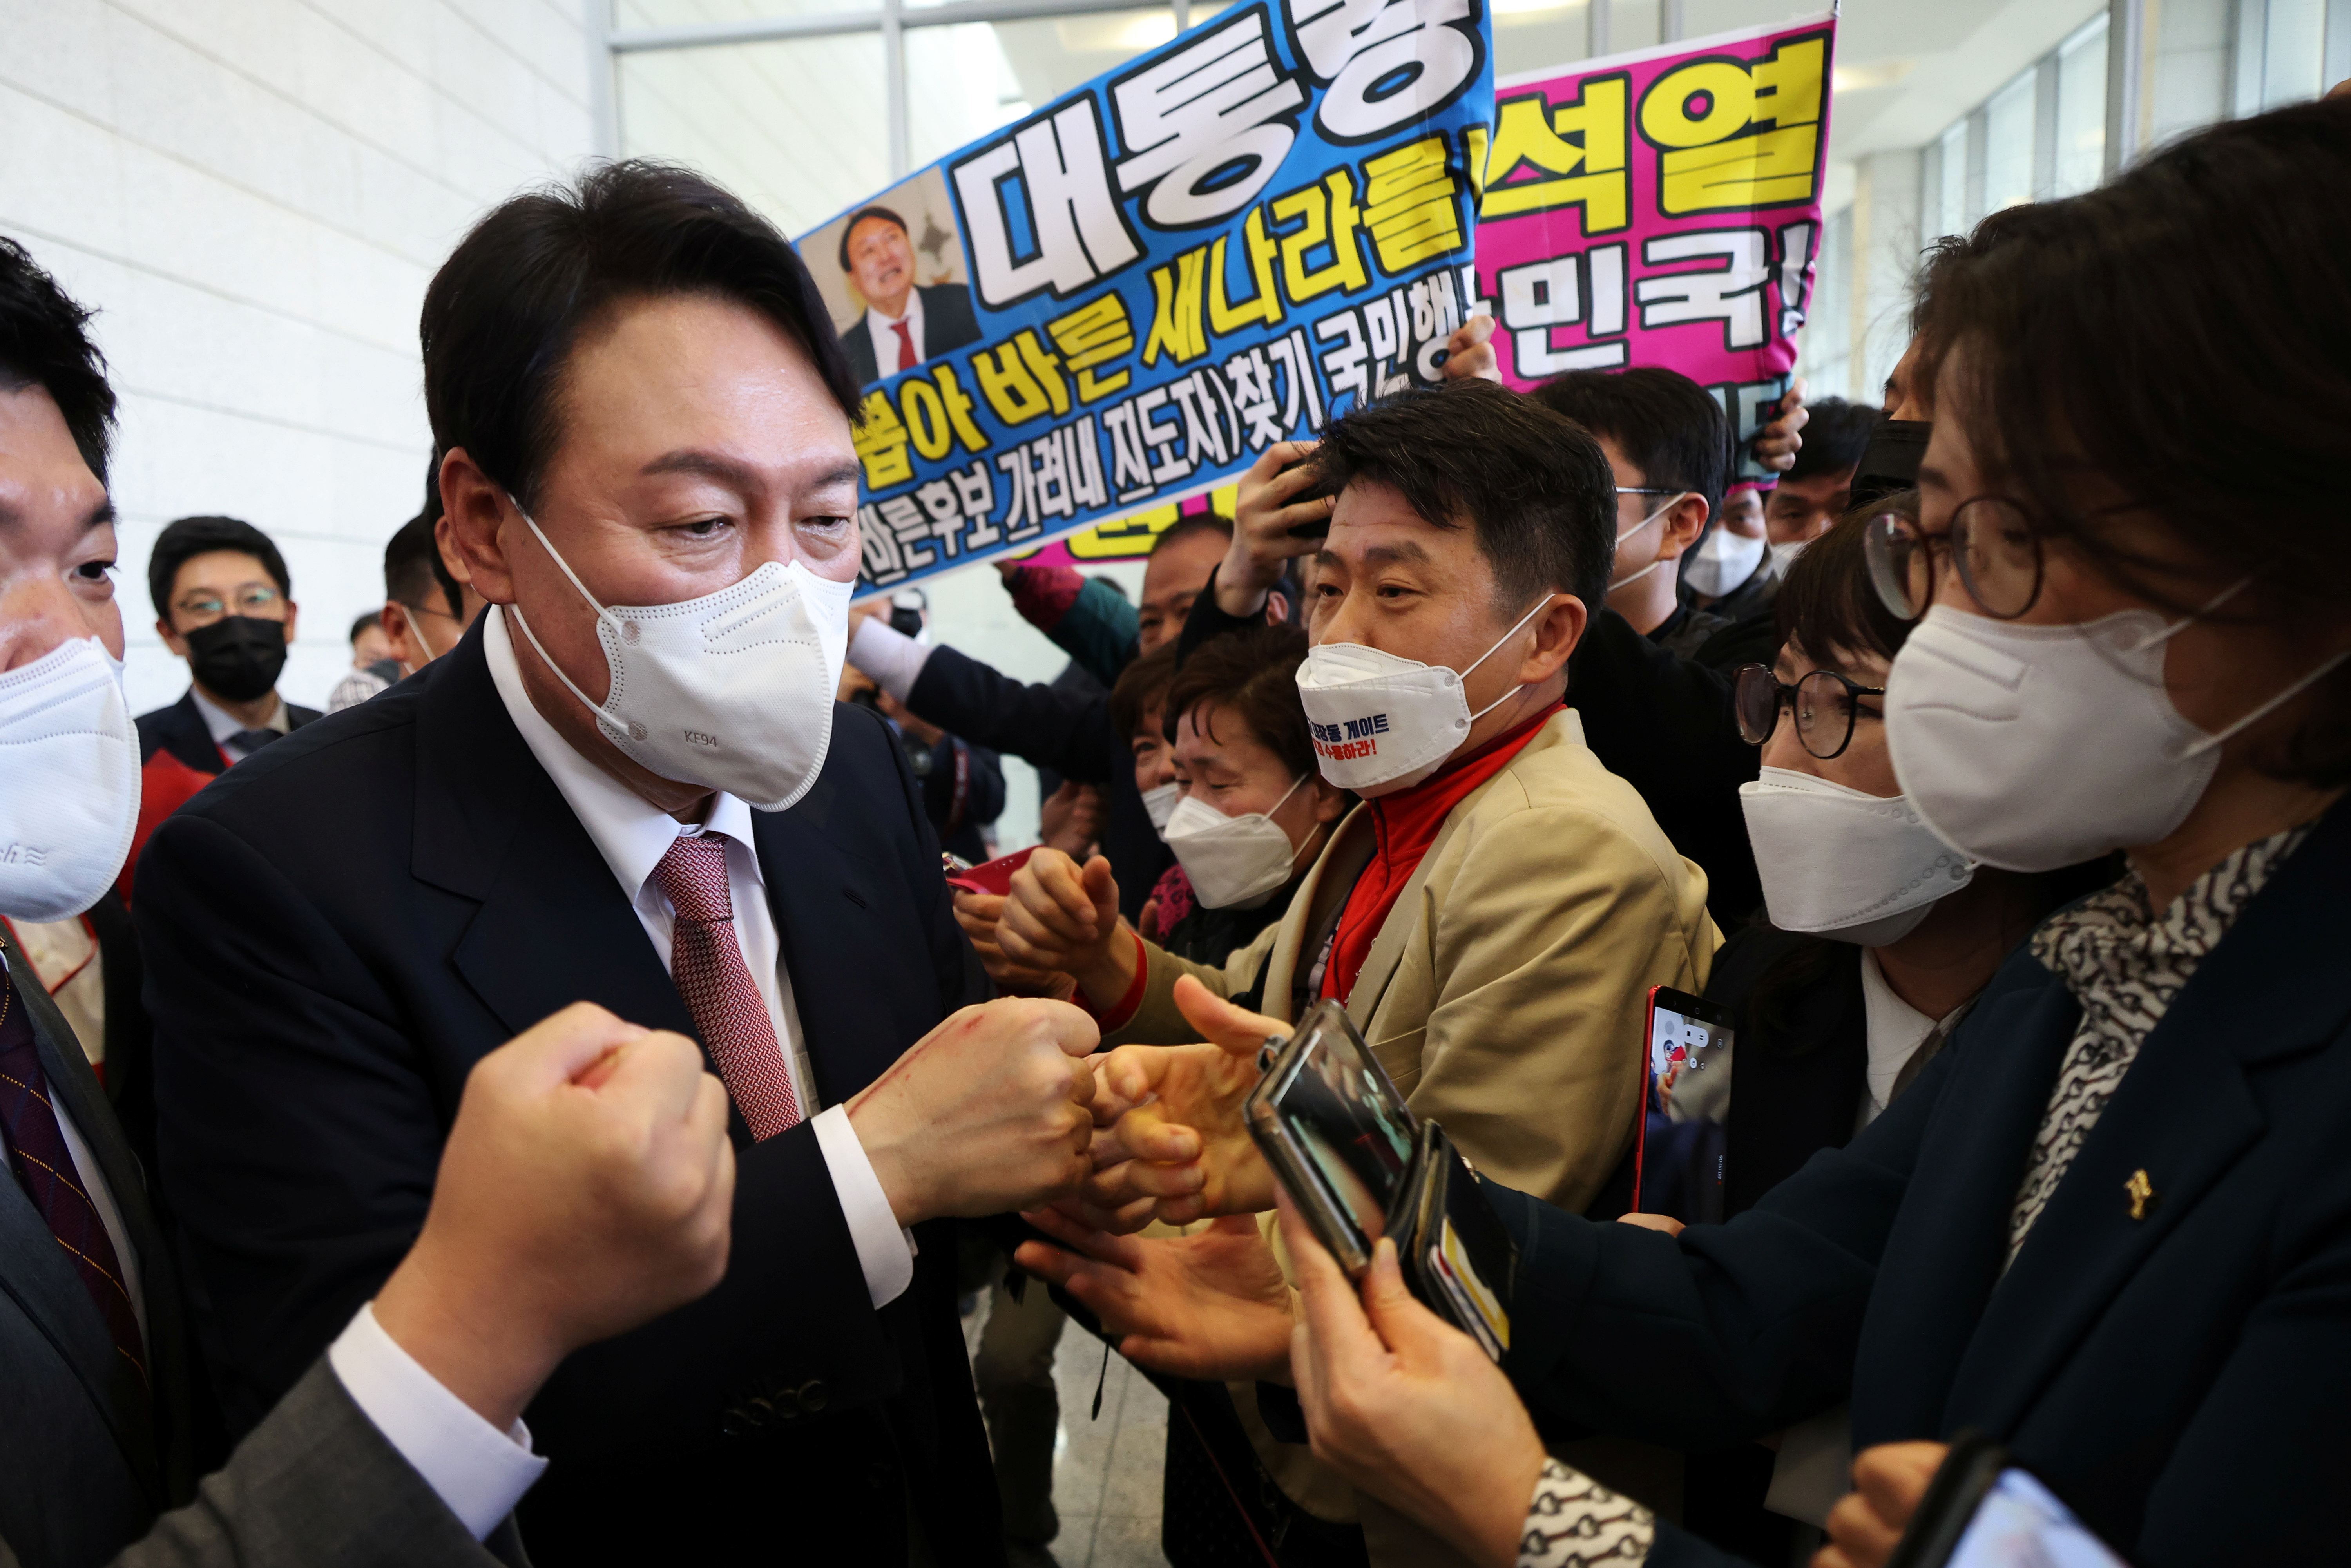 South Korea's main opposition People Power Party's contender for next year's presidential election, former Prosecutor General Yoon Seok-Youl, celebrates with his supporters after being chosen as the presidential election candidate, in Seoul